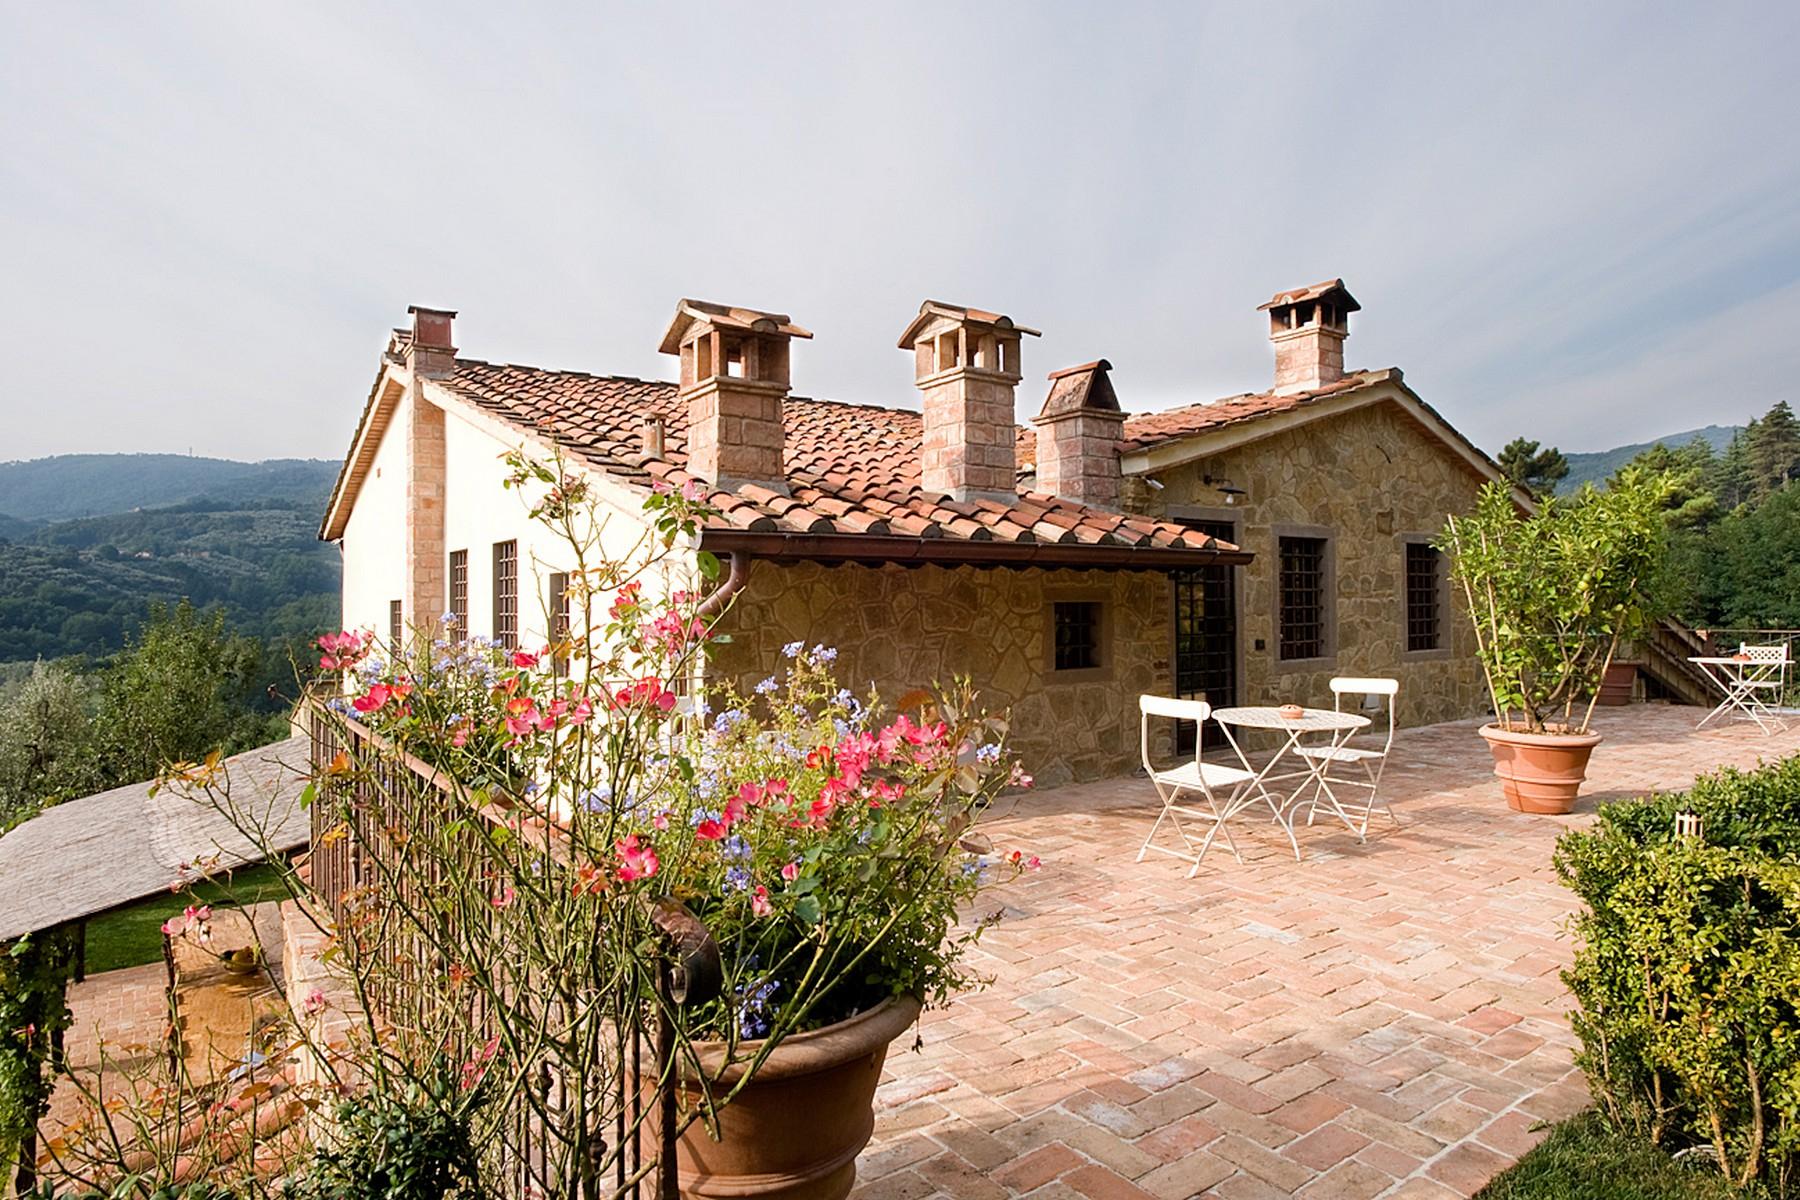 Farmhouse for sale in the Tuscan hills - 14